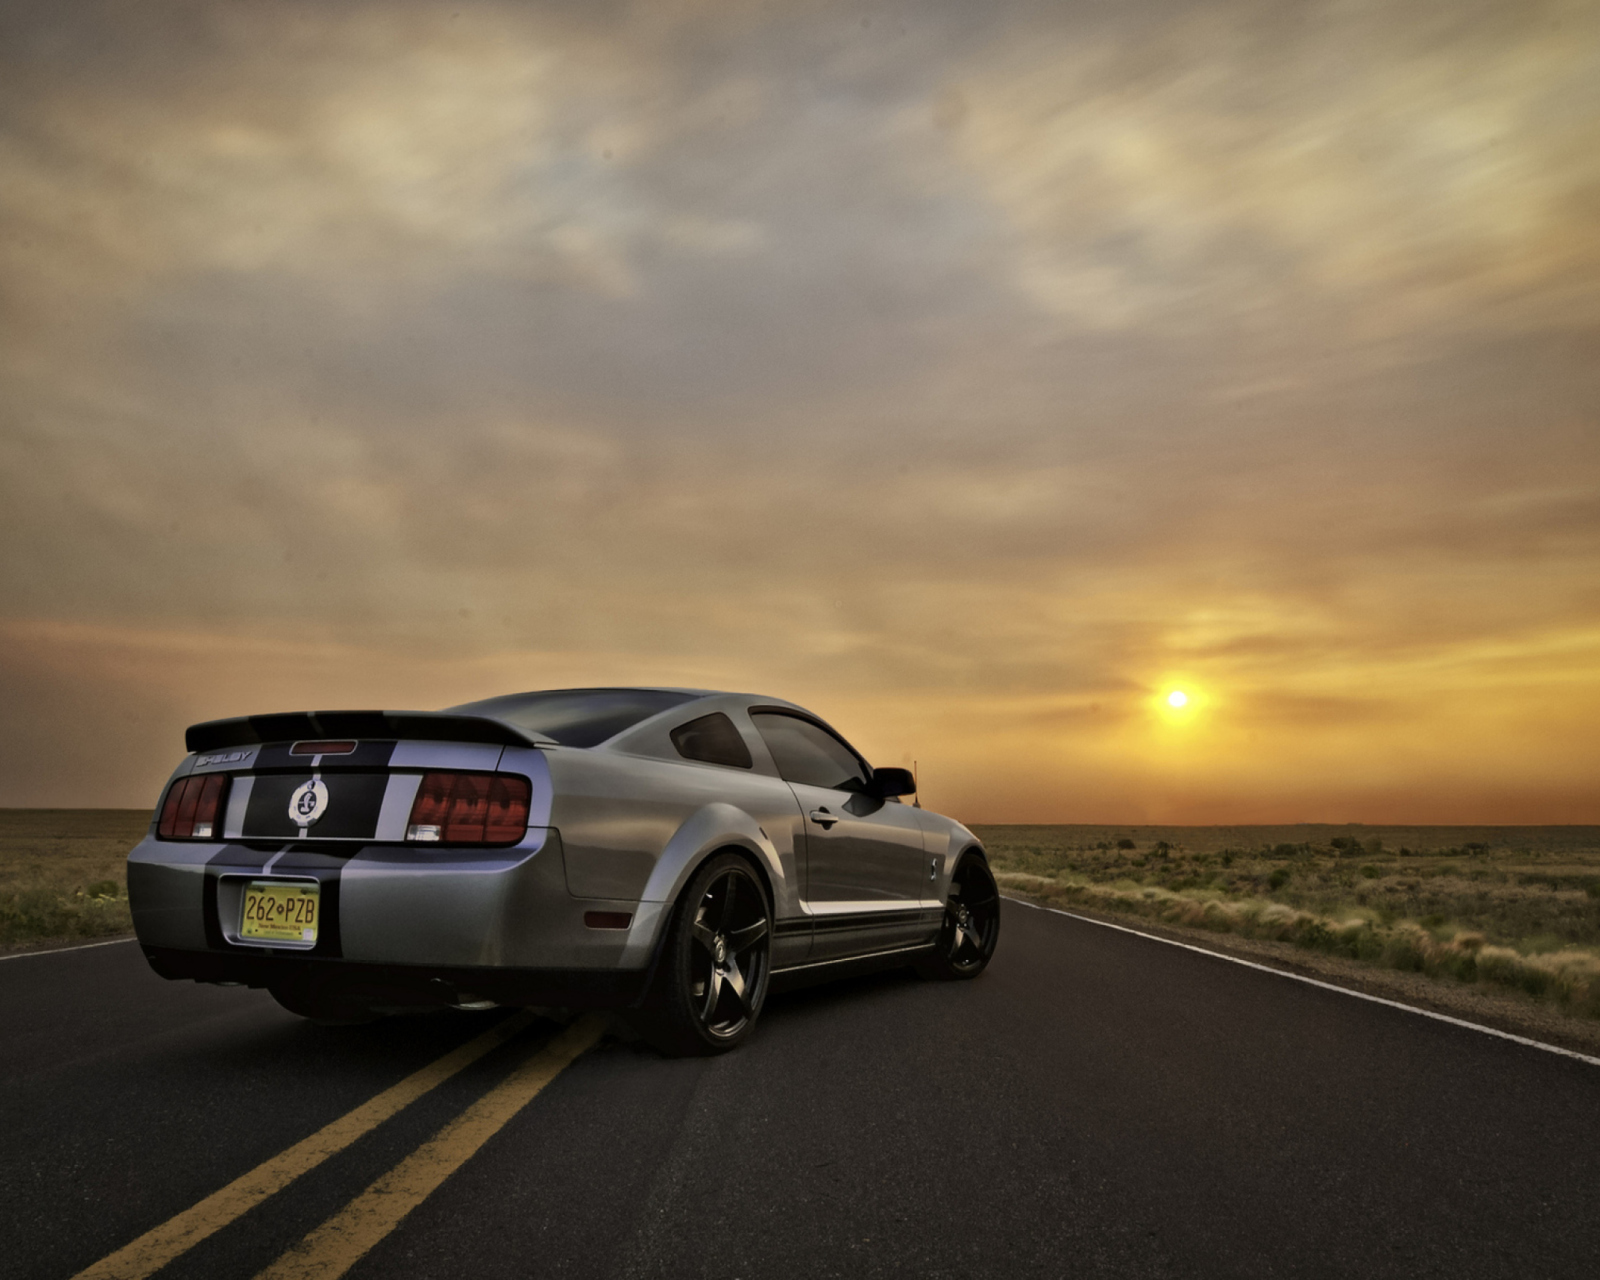 Das Ford Mustang Shelby GT500 Wallpaper 1600x1280